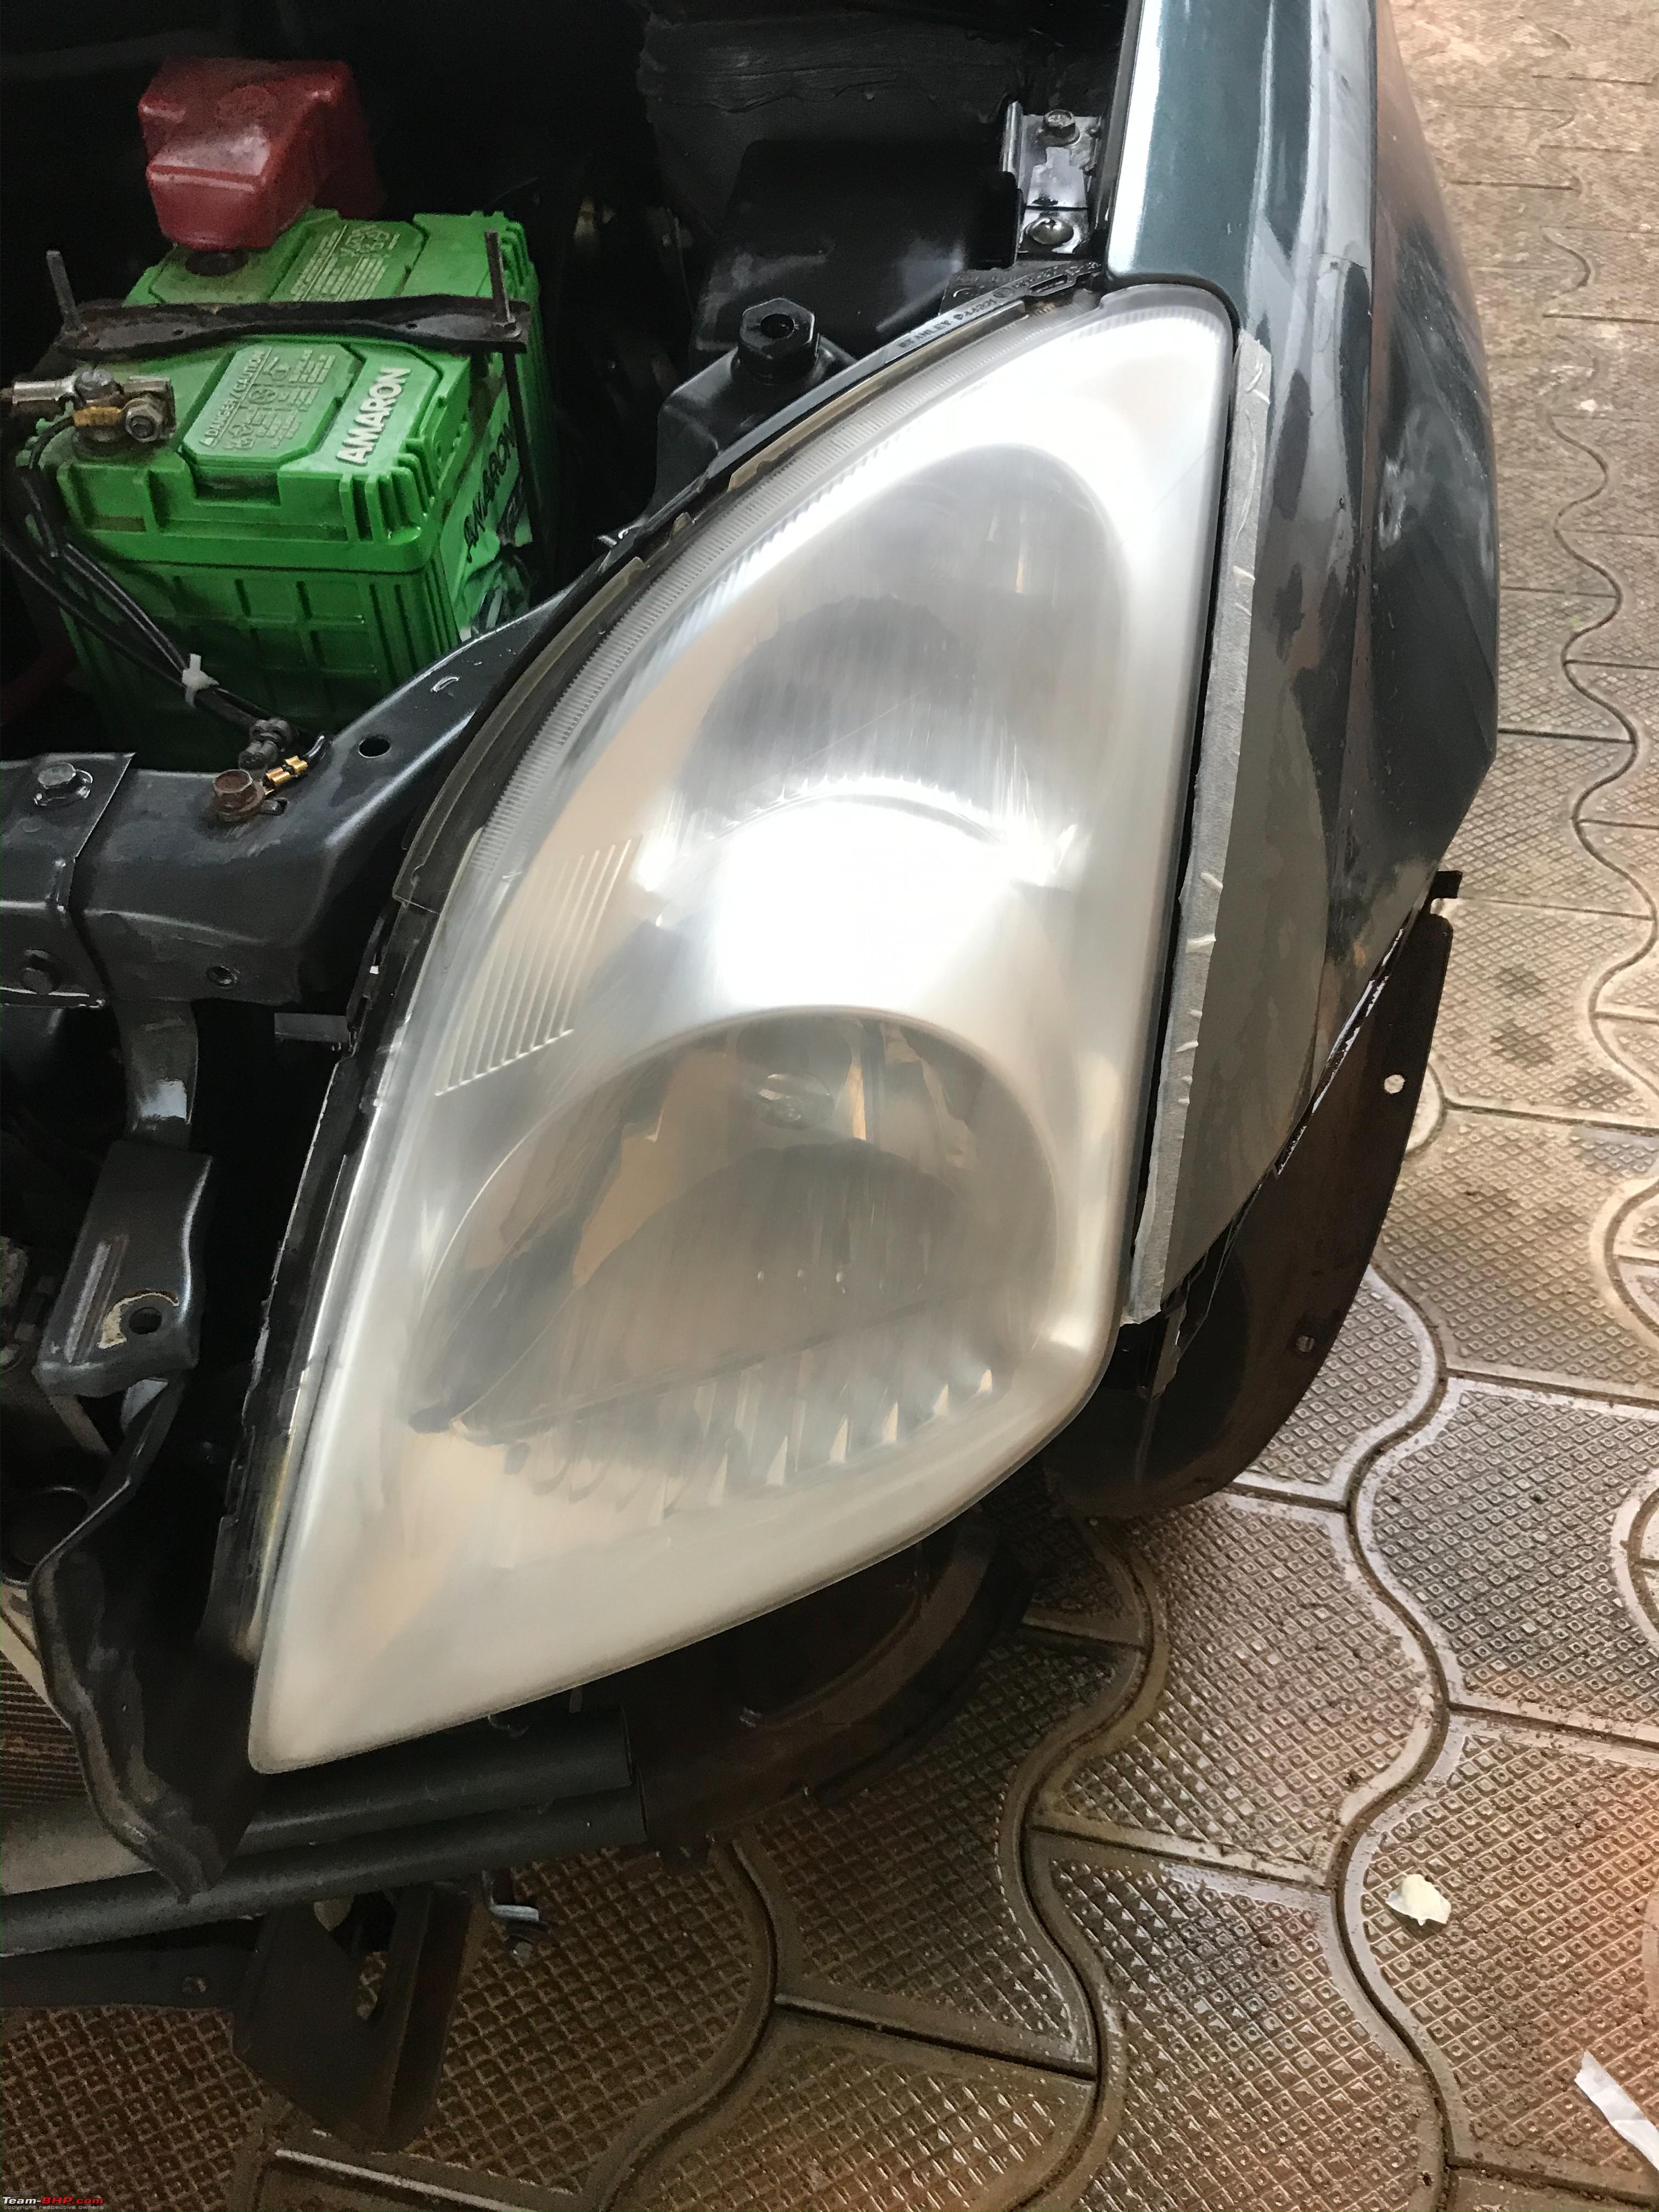 Can a rubbing compound be used in a car headlight restoration? - Quora